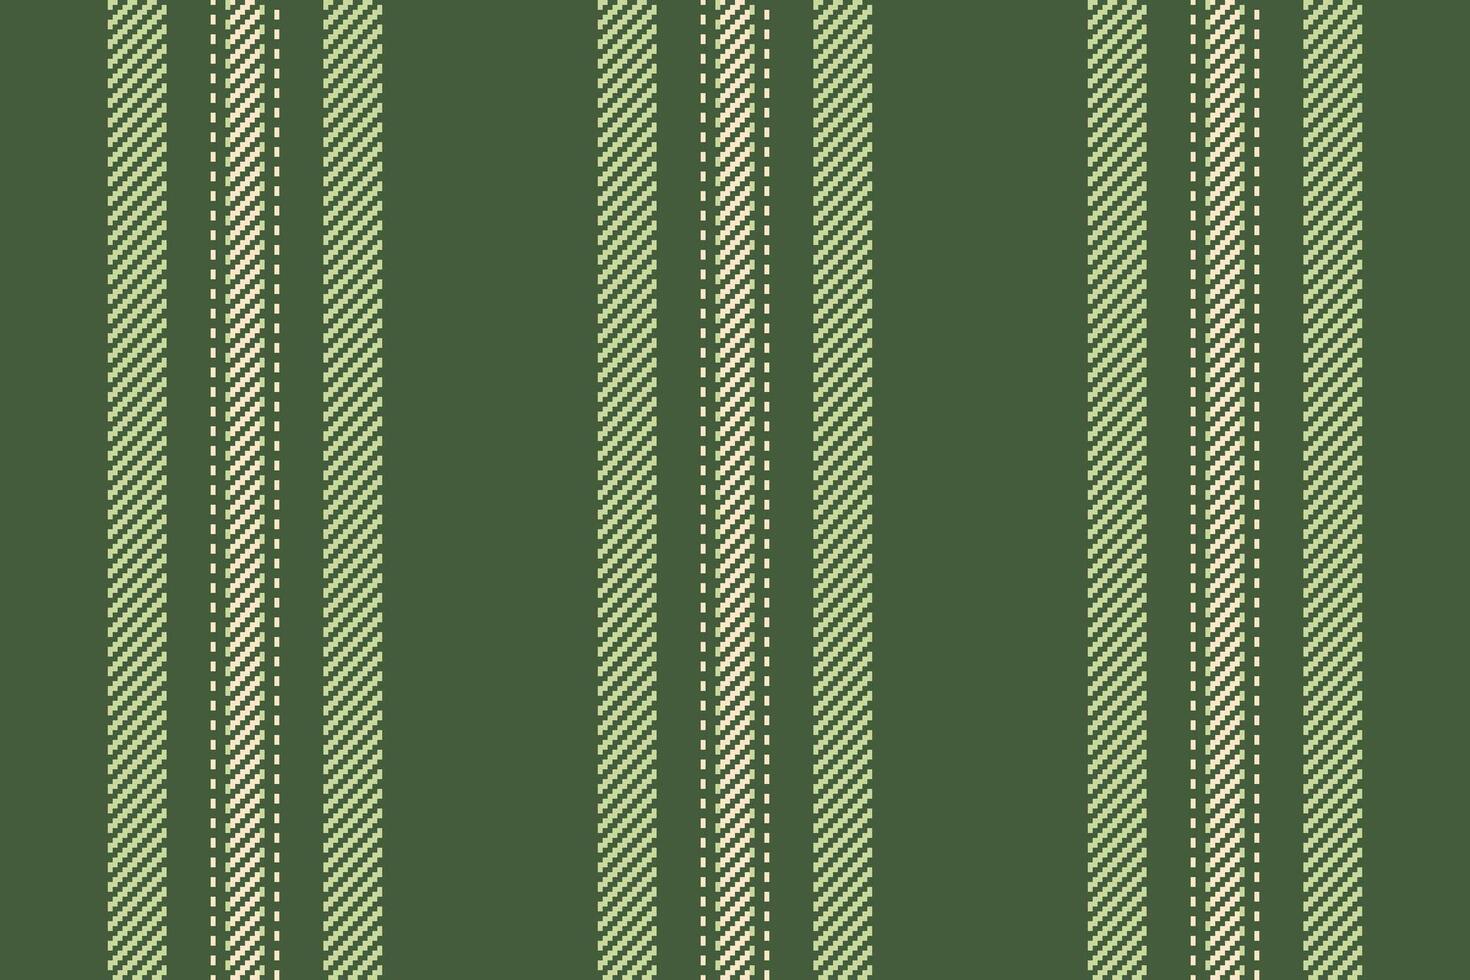 Industrial textile pattern background, flowing seamless vertical . Vogue stripe lines fabric texture in green and light colors. vector